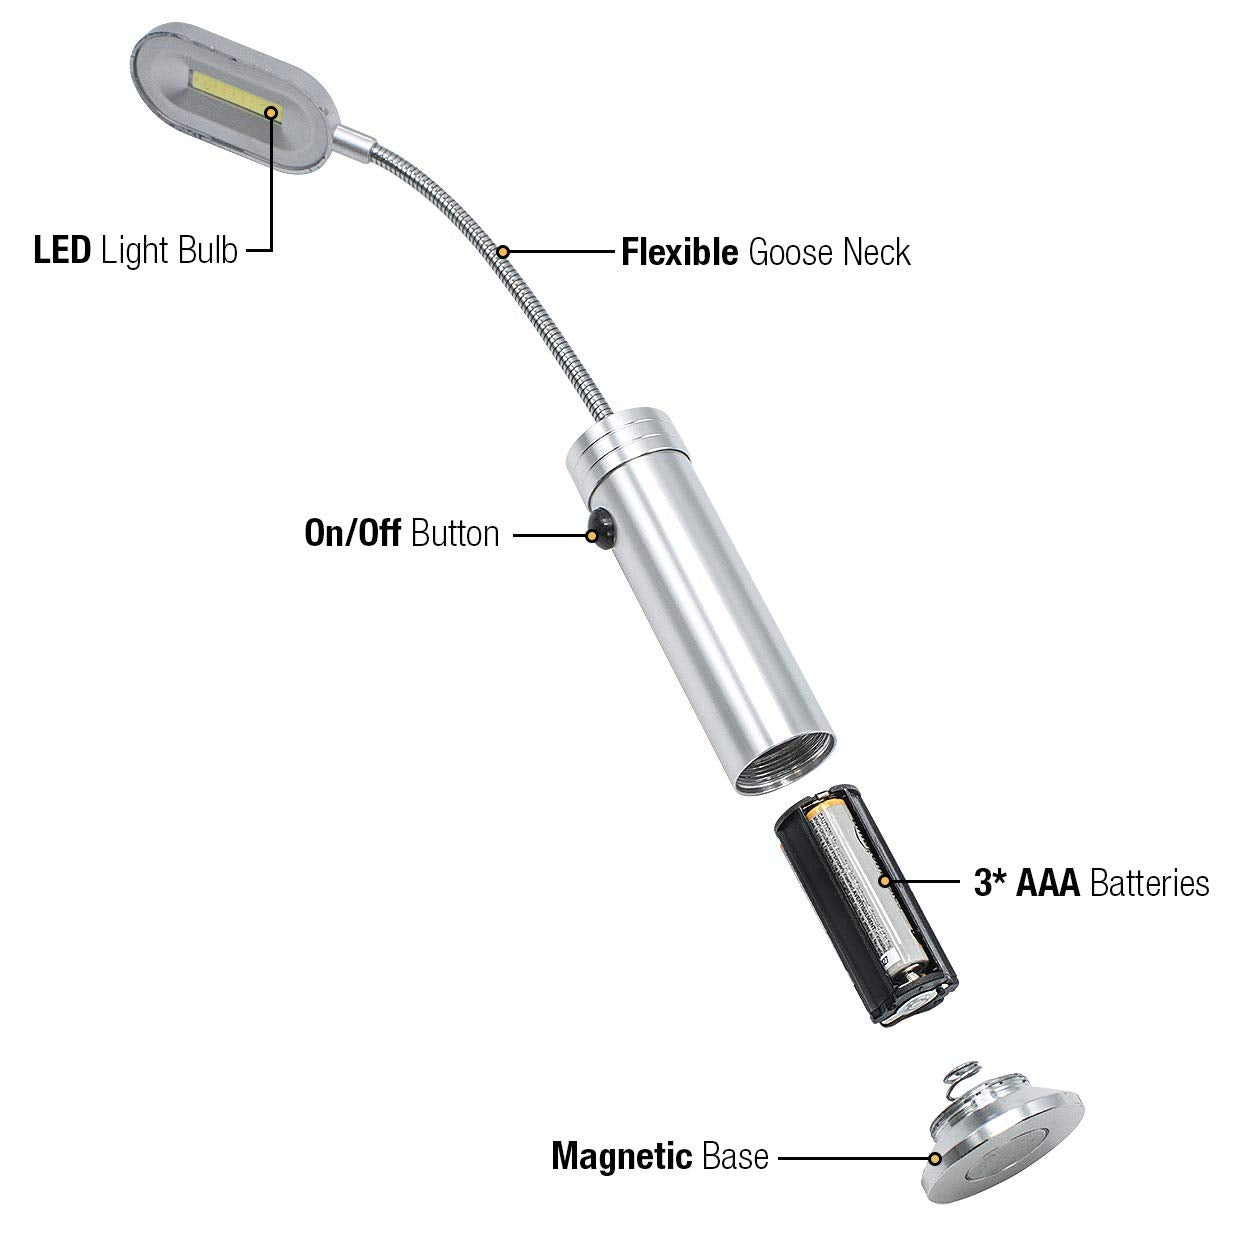 LED Magnetic Base light with gooseneck & weather resistant